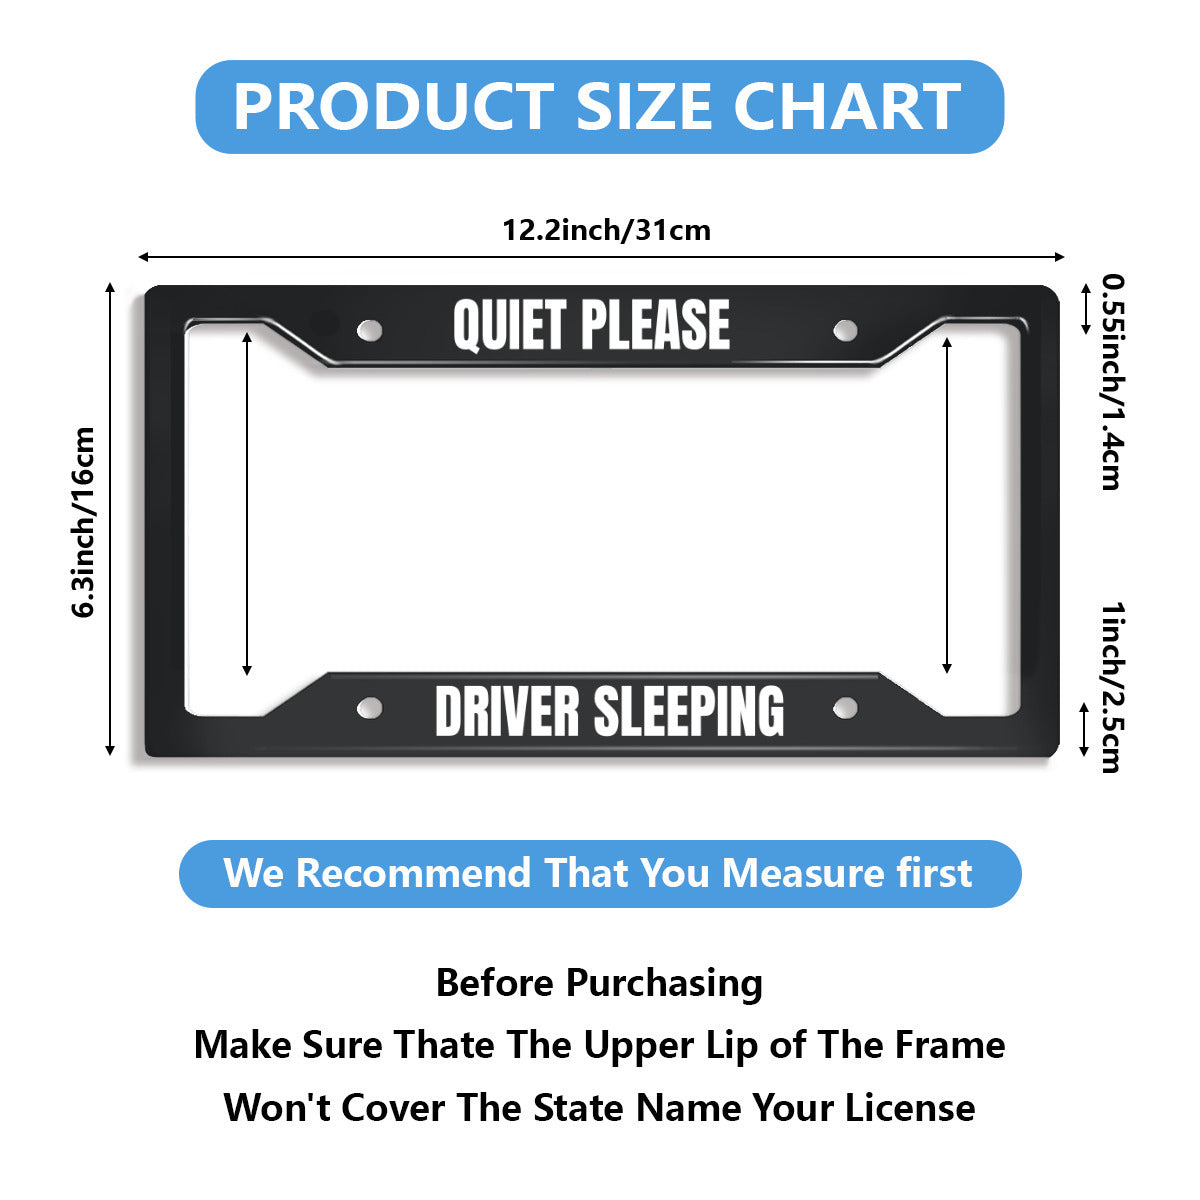 One Piece Four-hole license plate holder - Quiet Please, Driver Sleeping